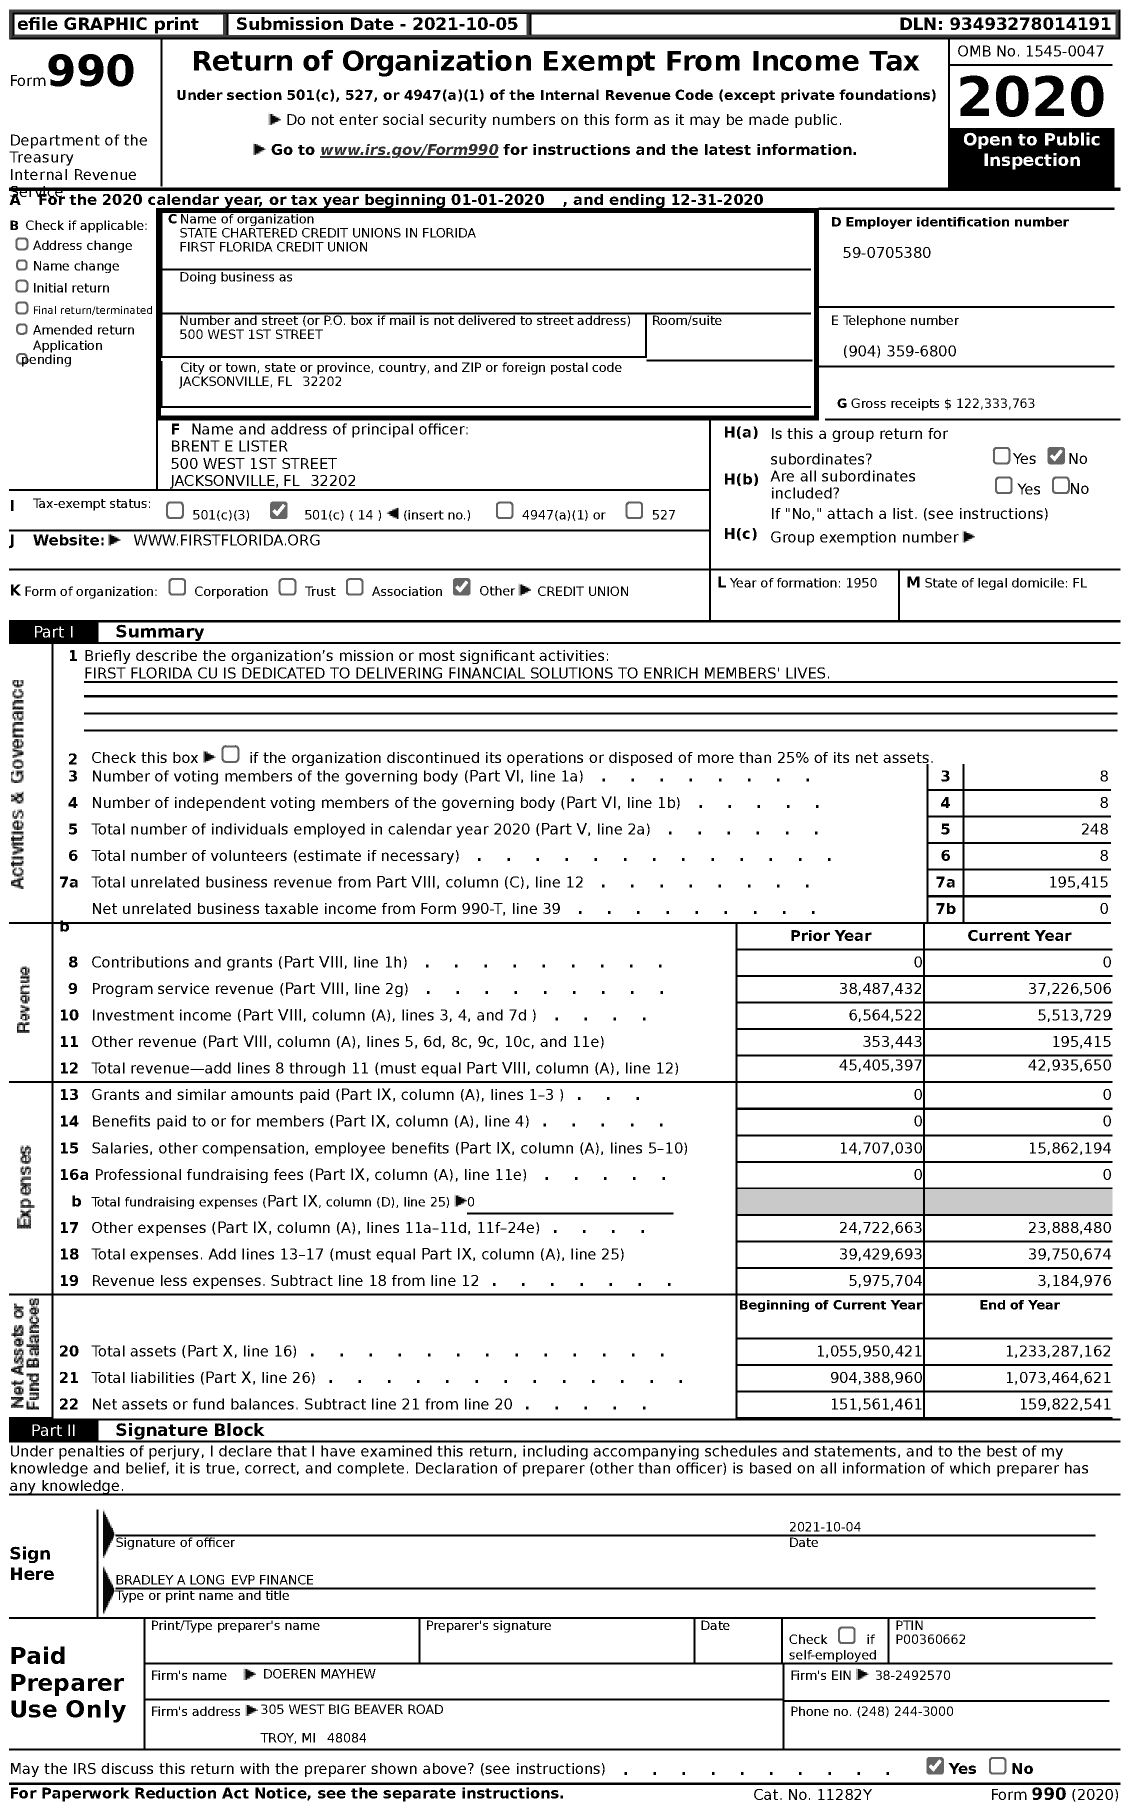 Image of first page of 2020 Form 990 for STATE CHARTERED Credit UNIONS IN FLORIDA First FLORIDA Credit Union